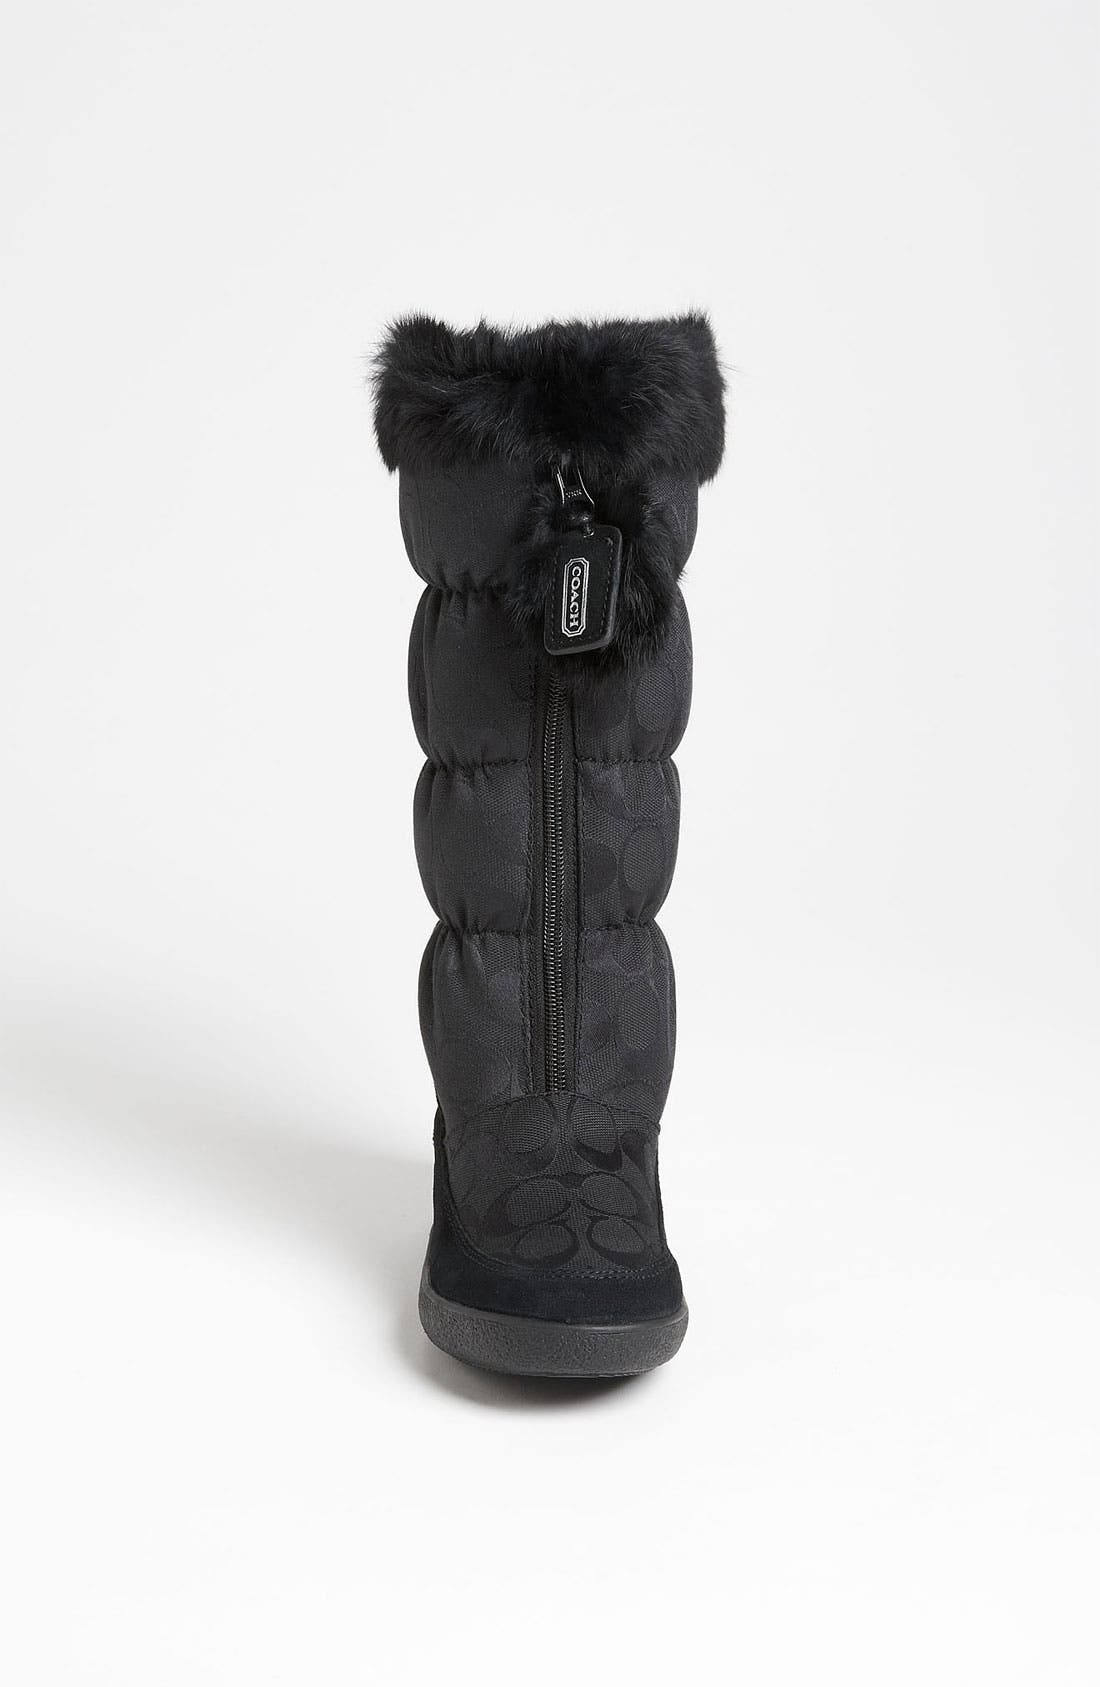 COACH 'Theona' Snow Boot | Nordstrom